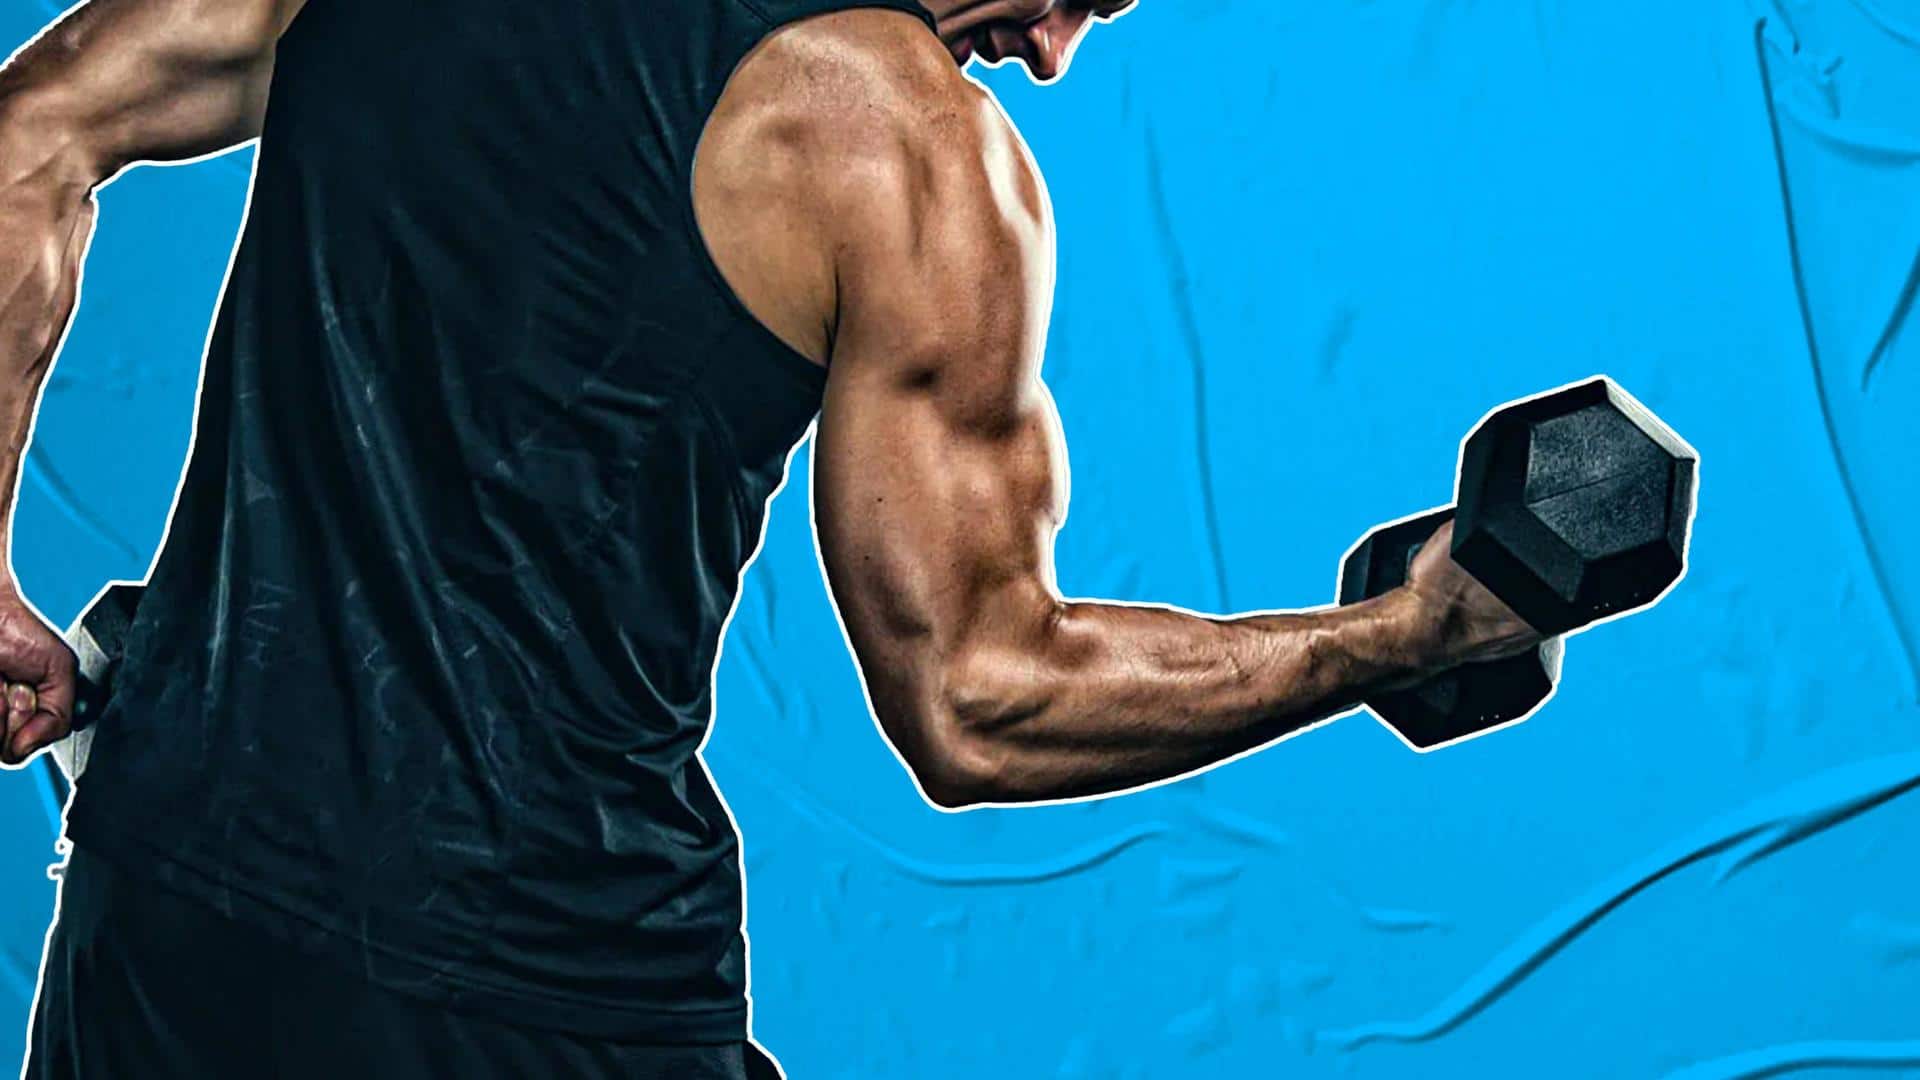 Muscles matter: Work your arm muscles with these exercises